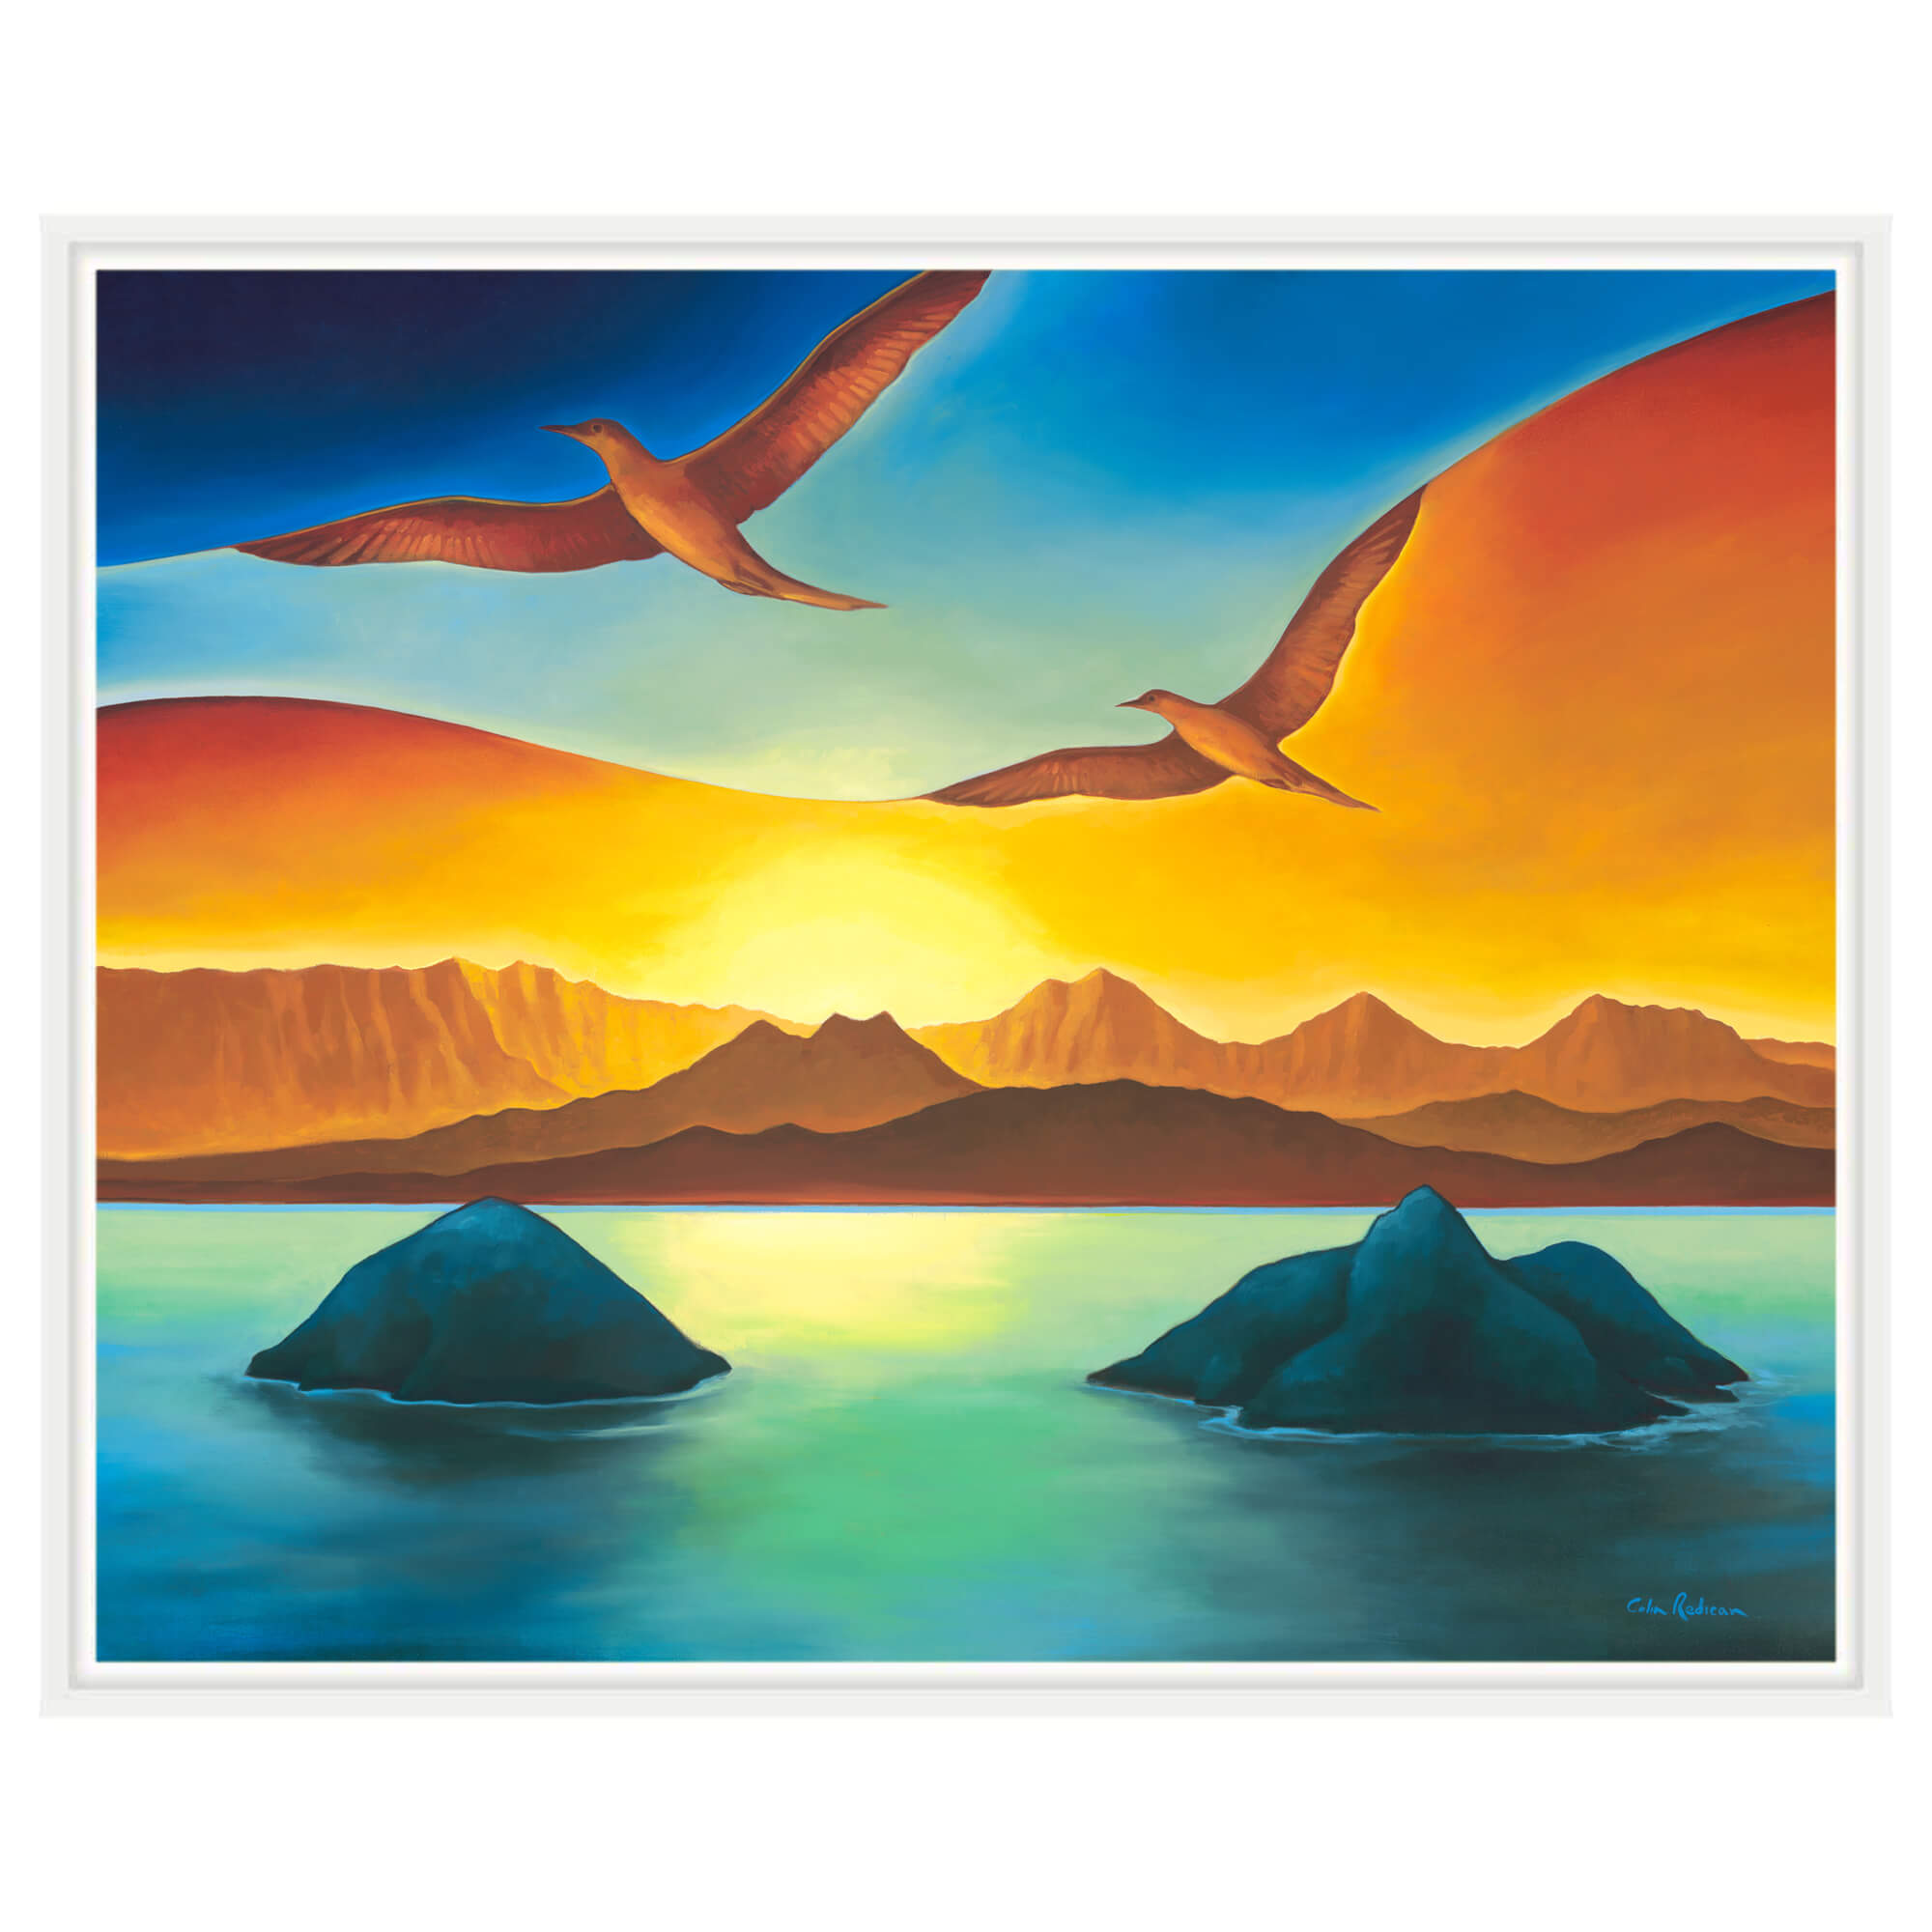 Gradient combination of the dark sky and sunset colors by Hawaii artist Colin redican